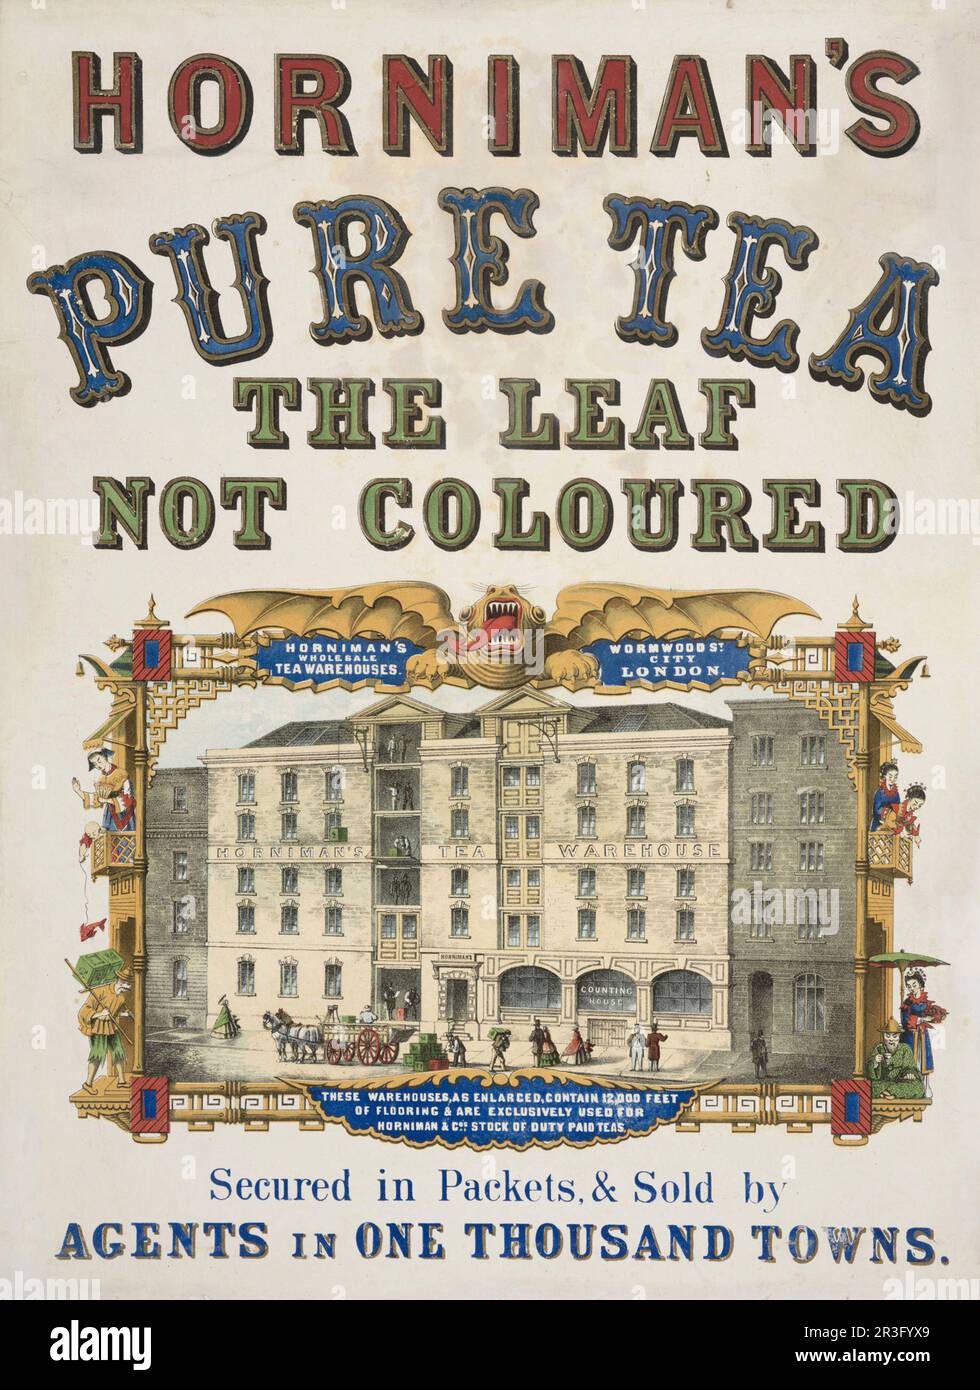 Vintage advertisement for Horniman's Pure Tea, with a view of the storefront of Horniman's Tea Warehouse. Stock Photo